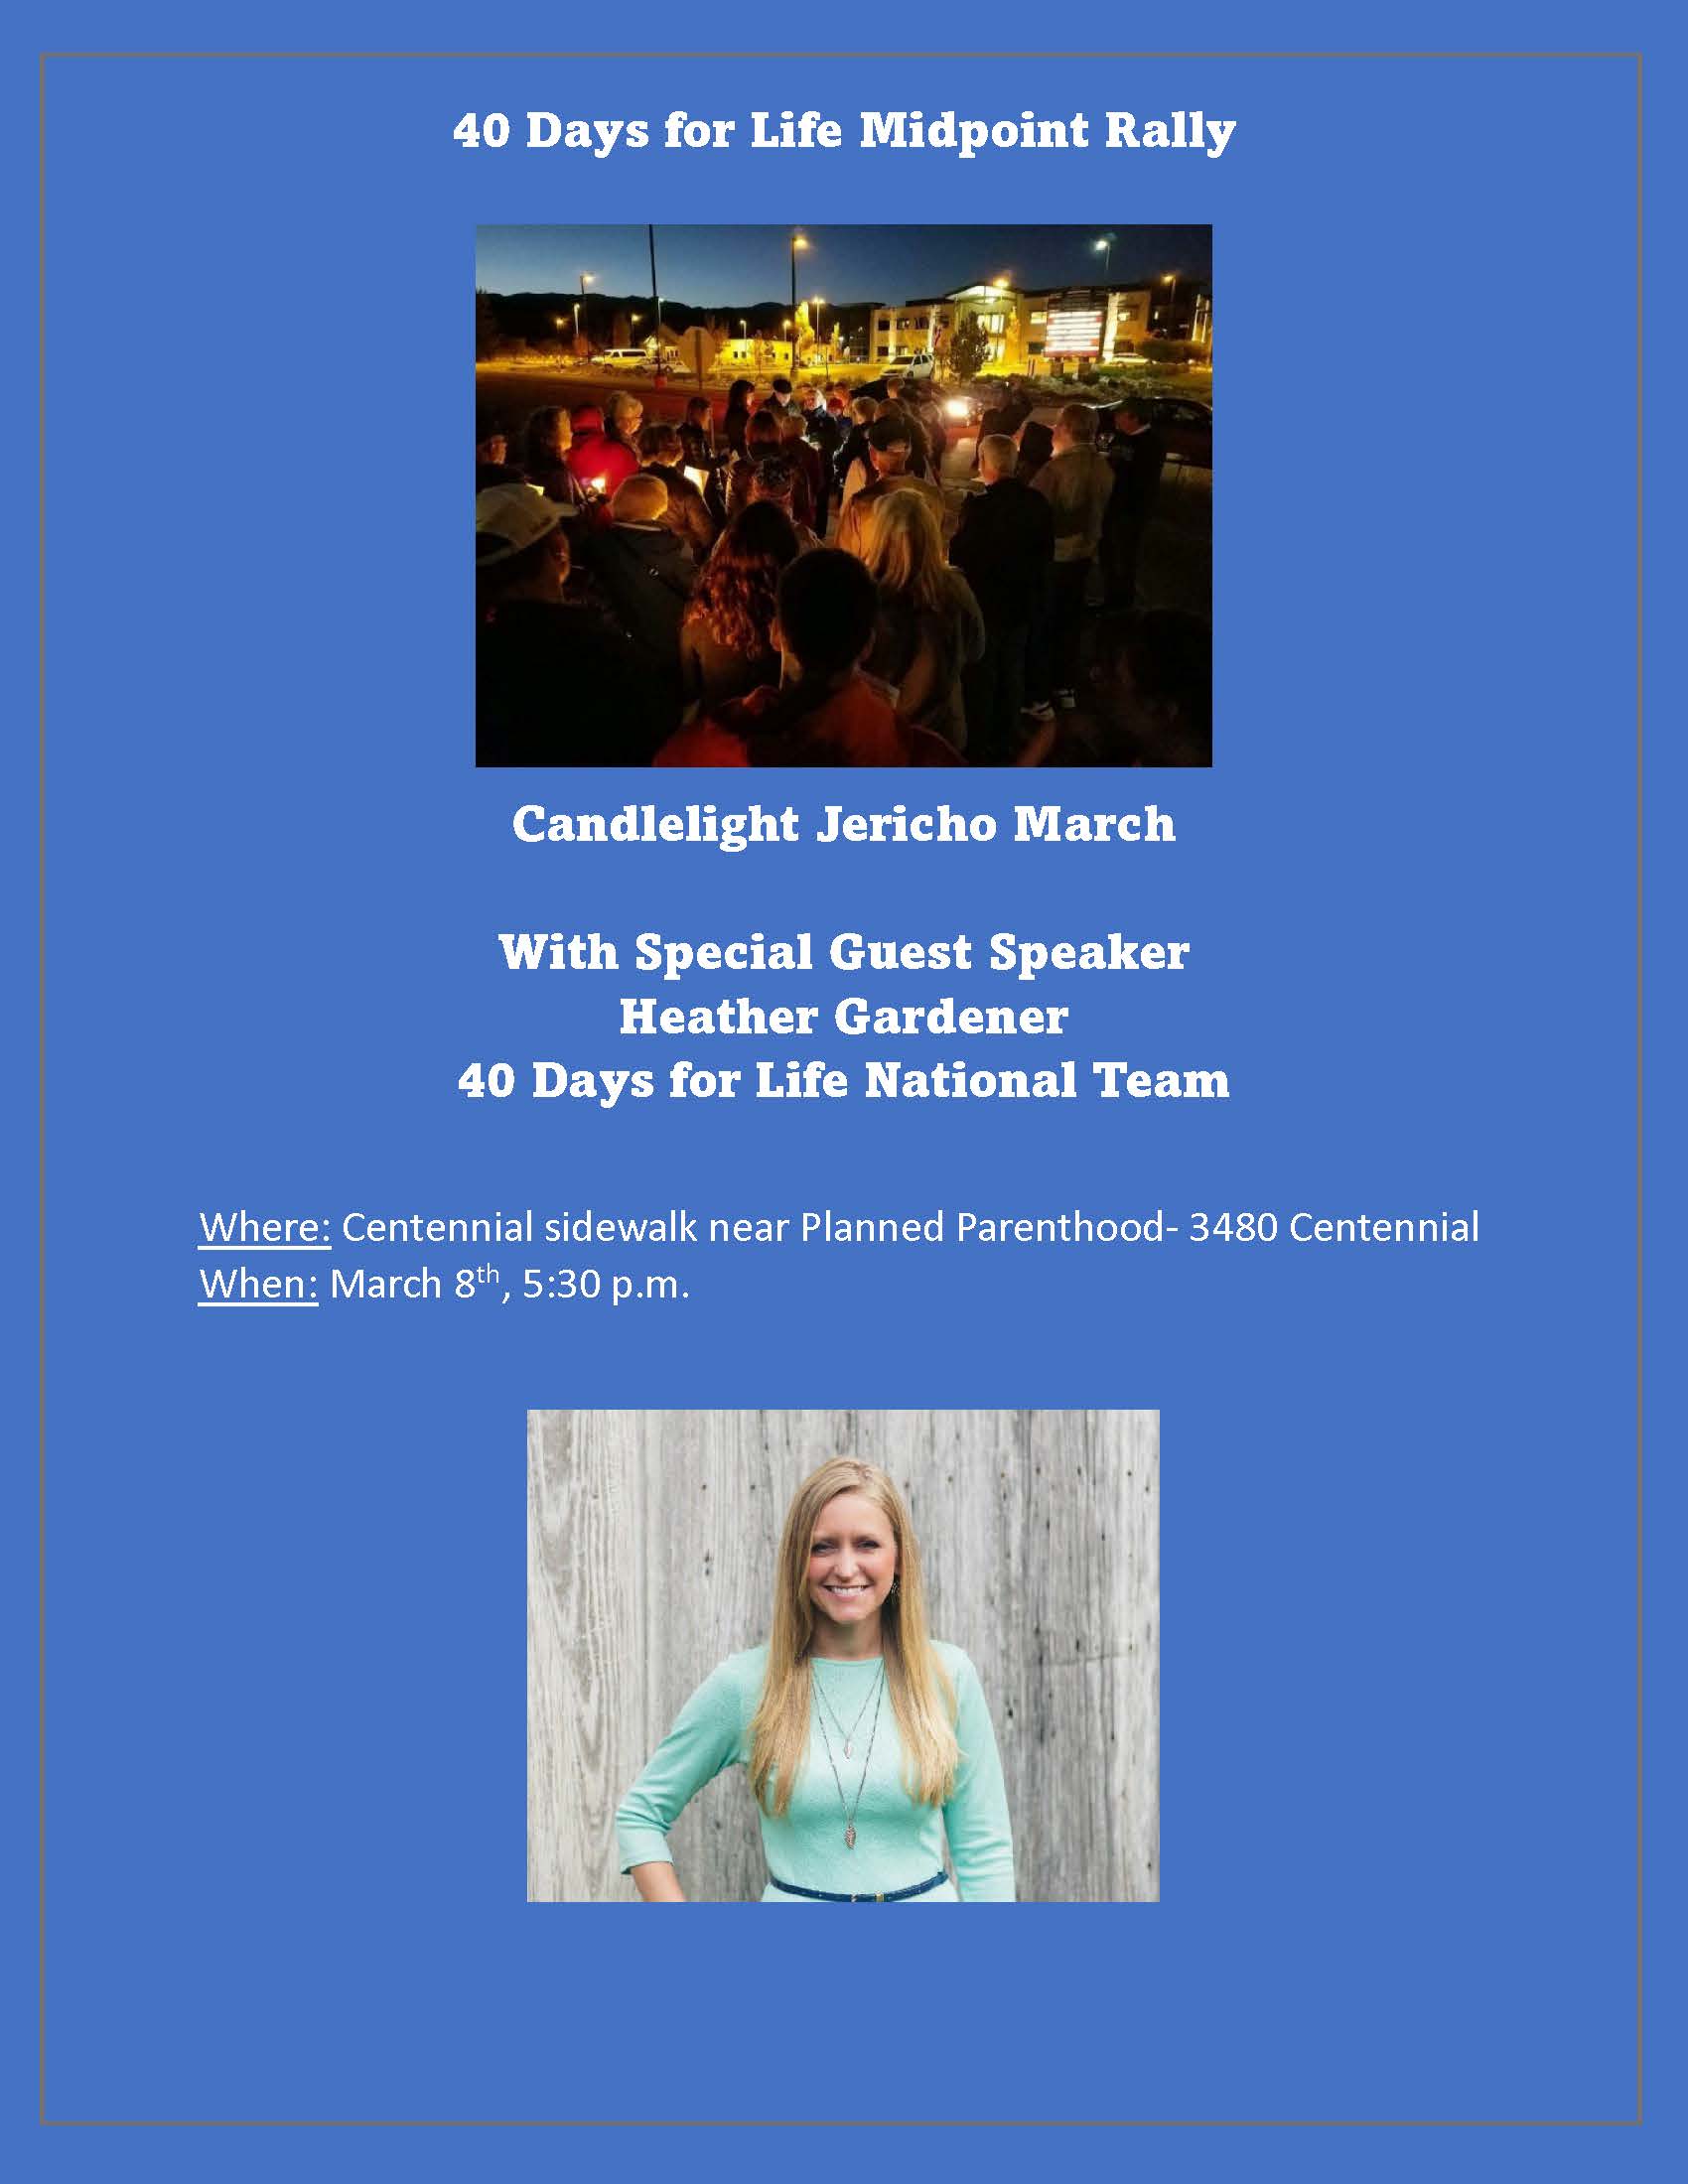 40 Days for Life Mid-Point Rally and Candelit Jericho March